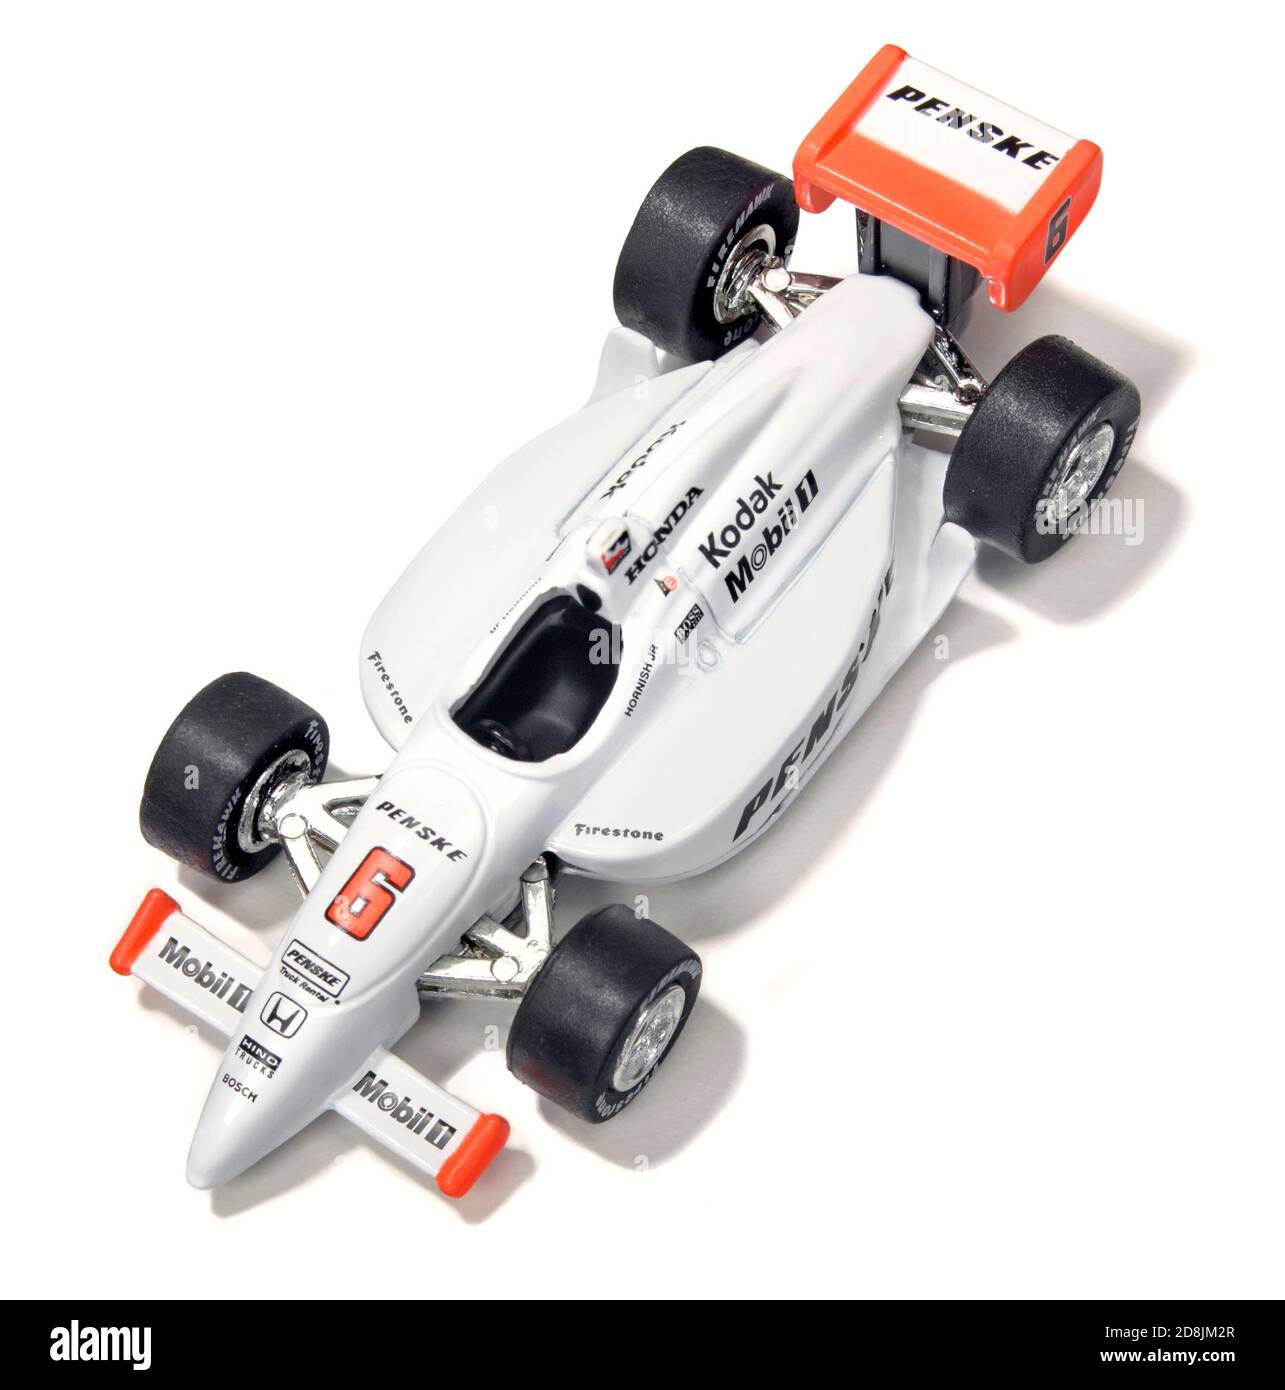 White Penske toy race car with orange accents and sponsor logos photographed on a white background Stock Photo